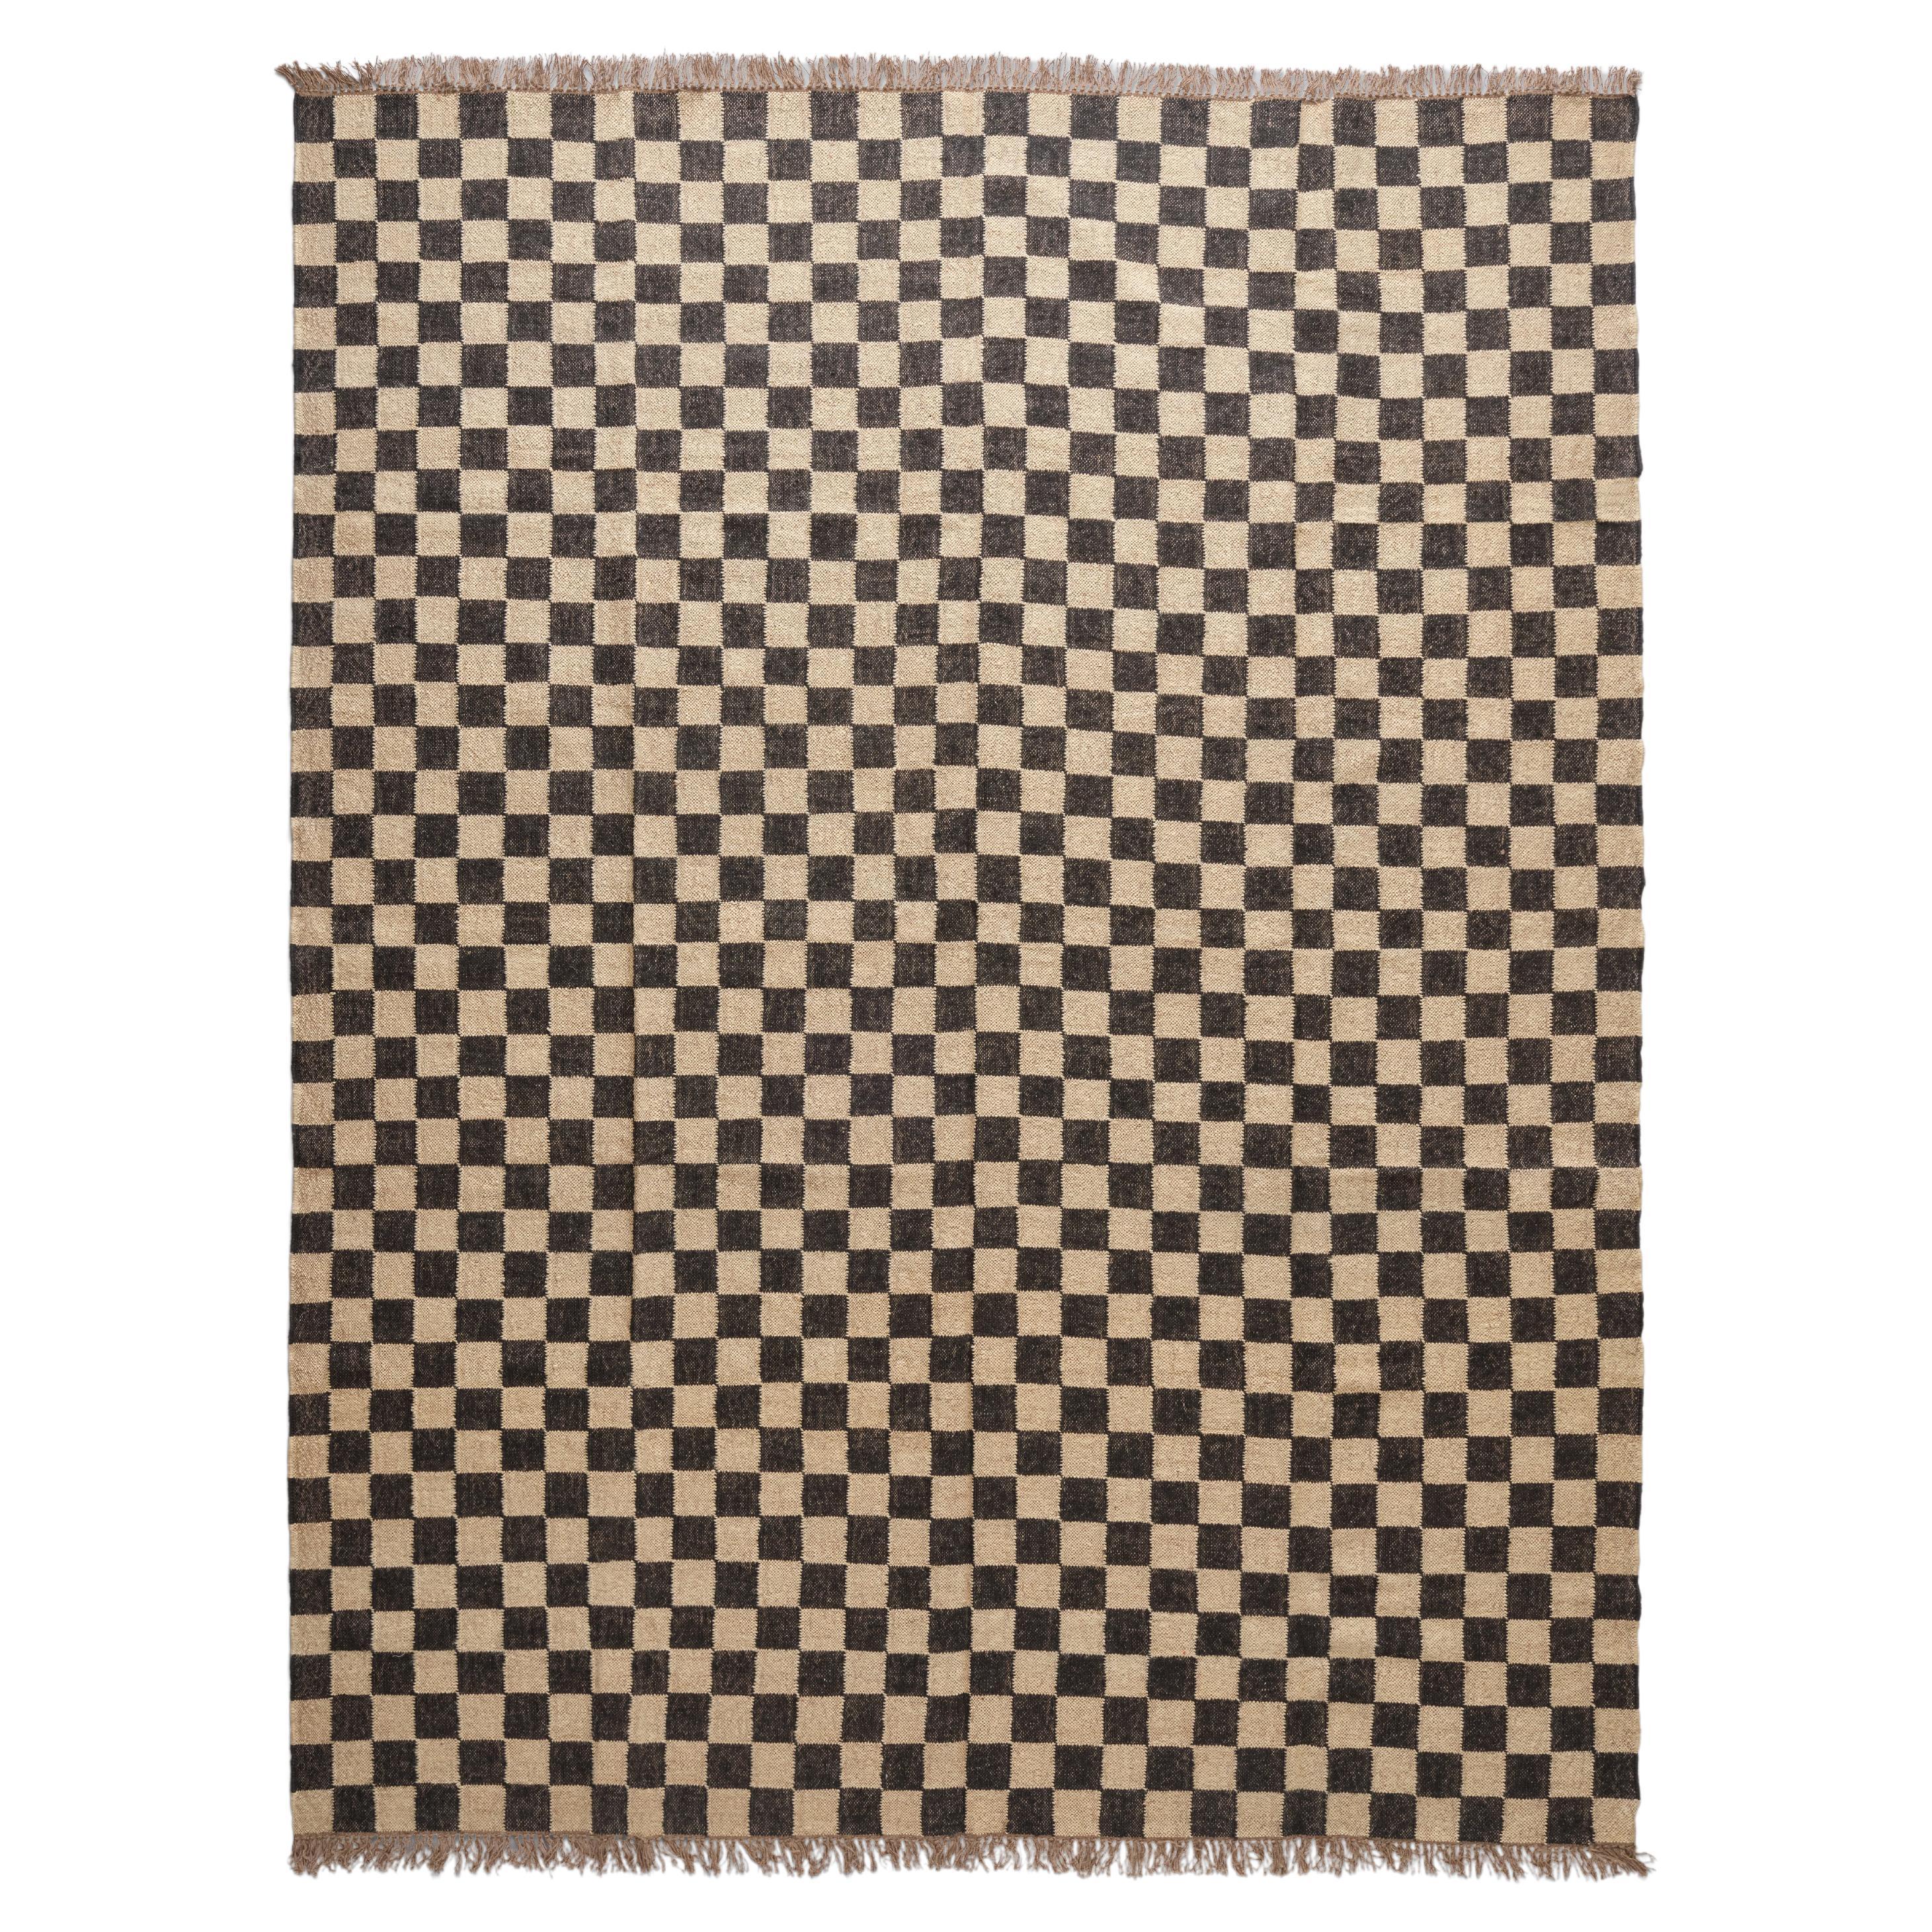 The Forsyth Checkerboard Rug - Off Black, 2'6x8 Runner For Sale